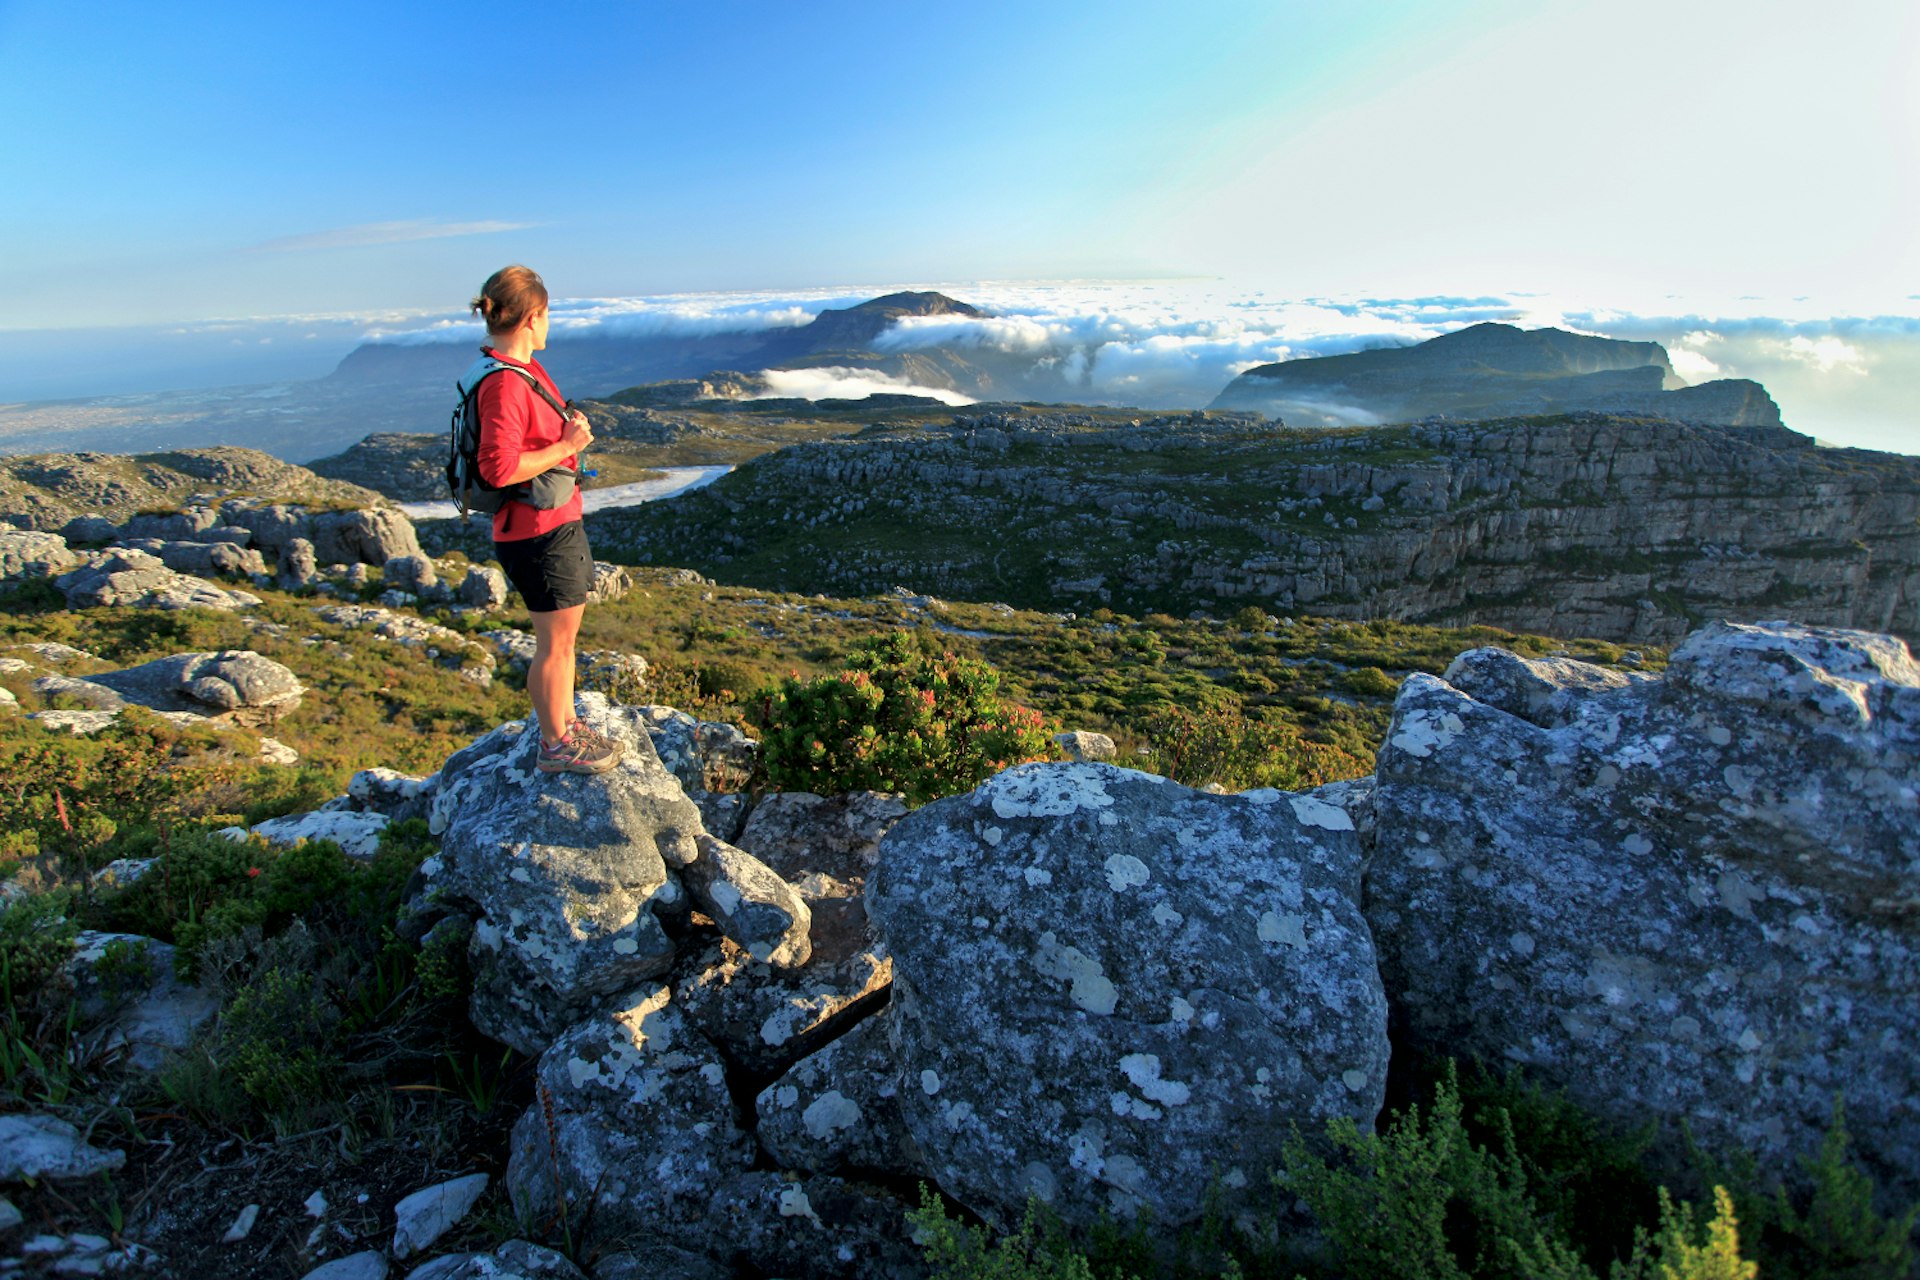 Hiker atop Table Mountain, Cape Town, South Africa. Image by Jacques Marais / Getty